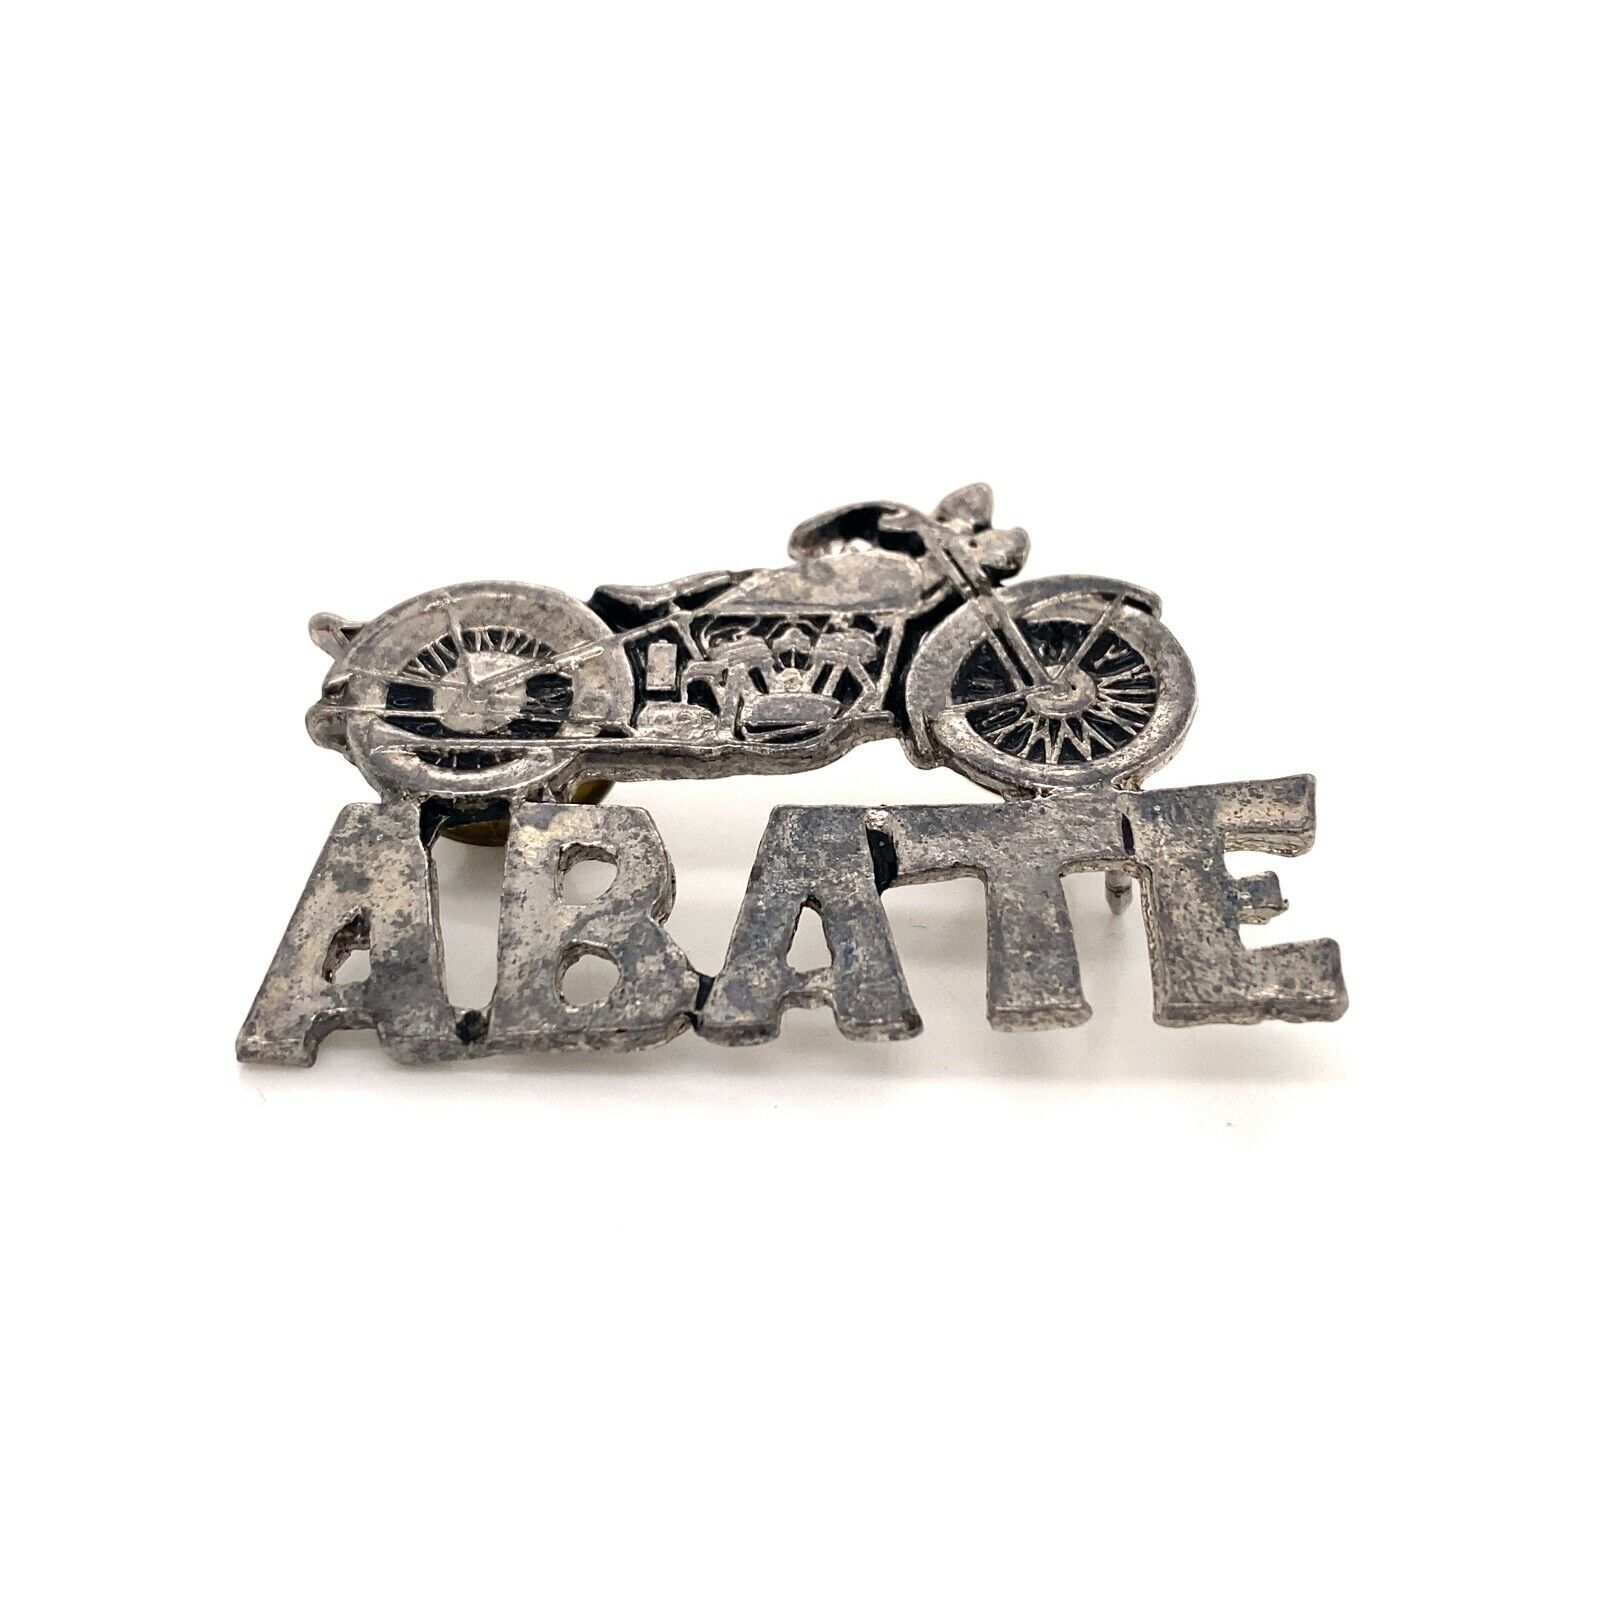 VTG Estate Abate Motorcycle Silver Plate Double Post Motorcycle Vest Jacket Pin